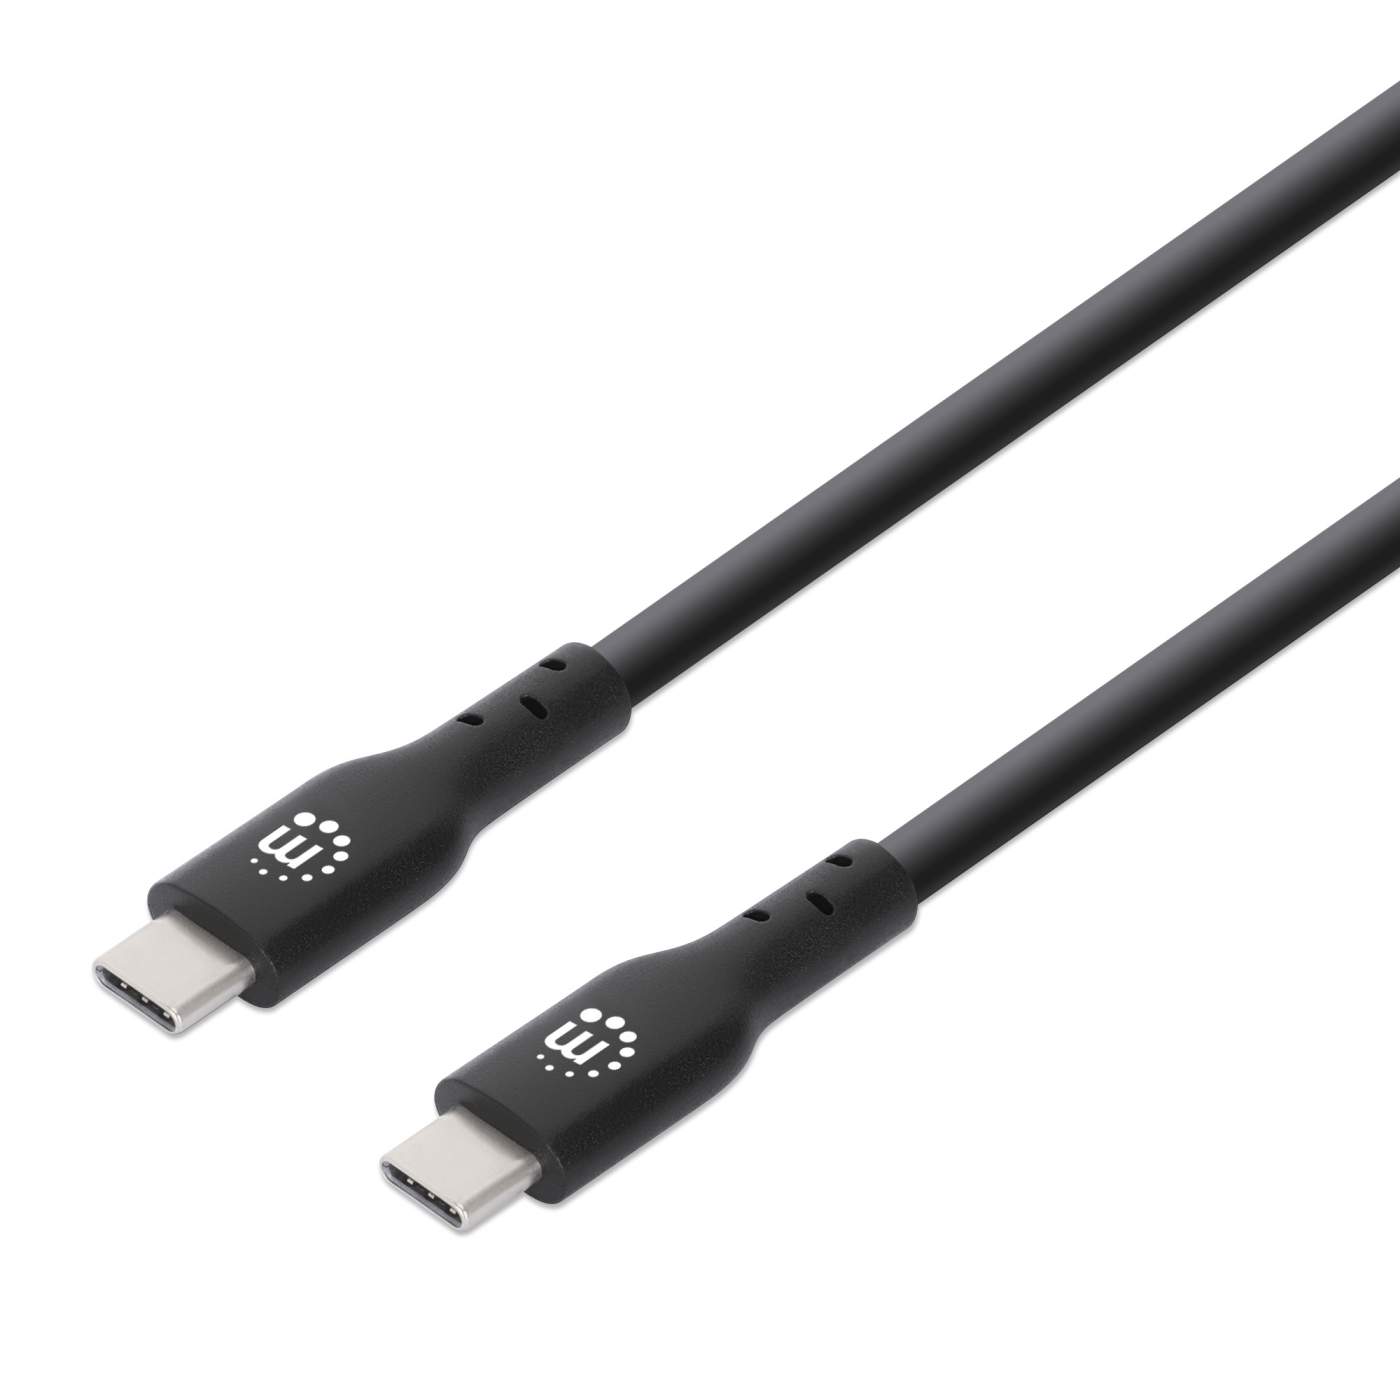 USB 2.0 Type-C Device Cable Image 1